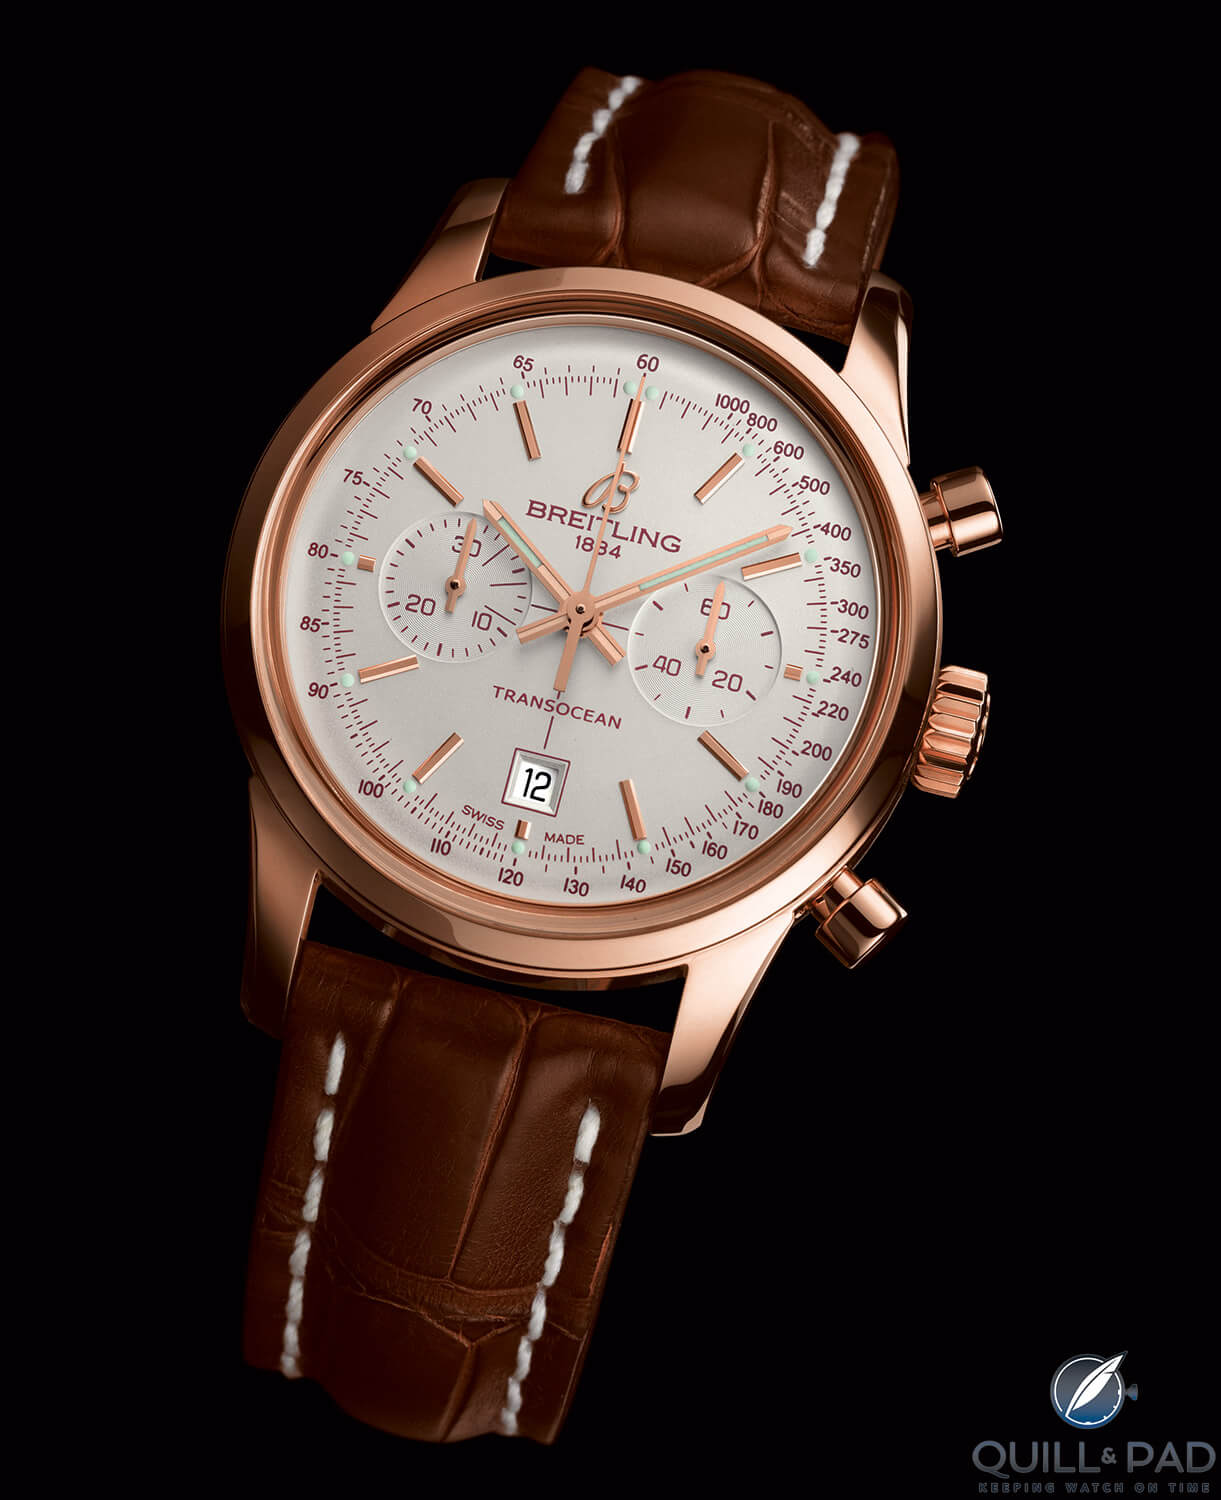 Breitling Transocean Chronograph in red gold